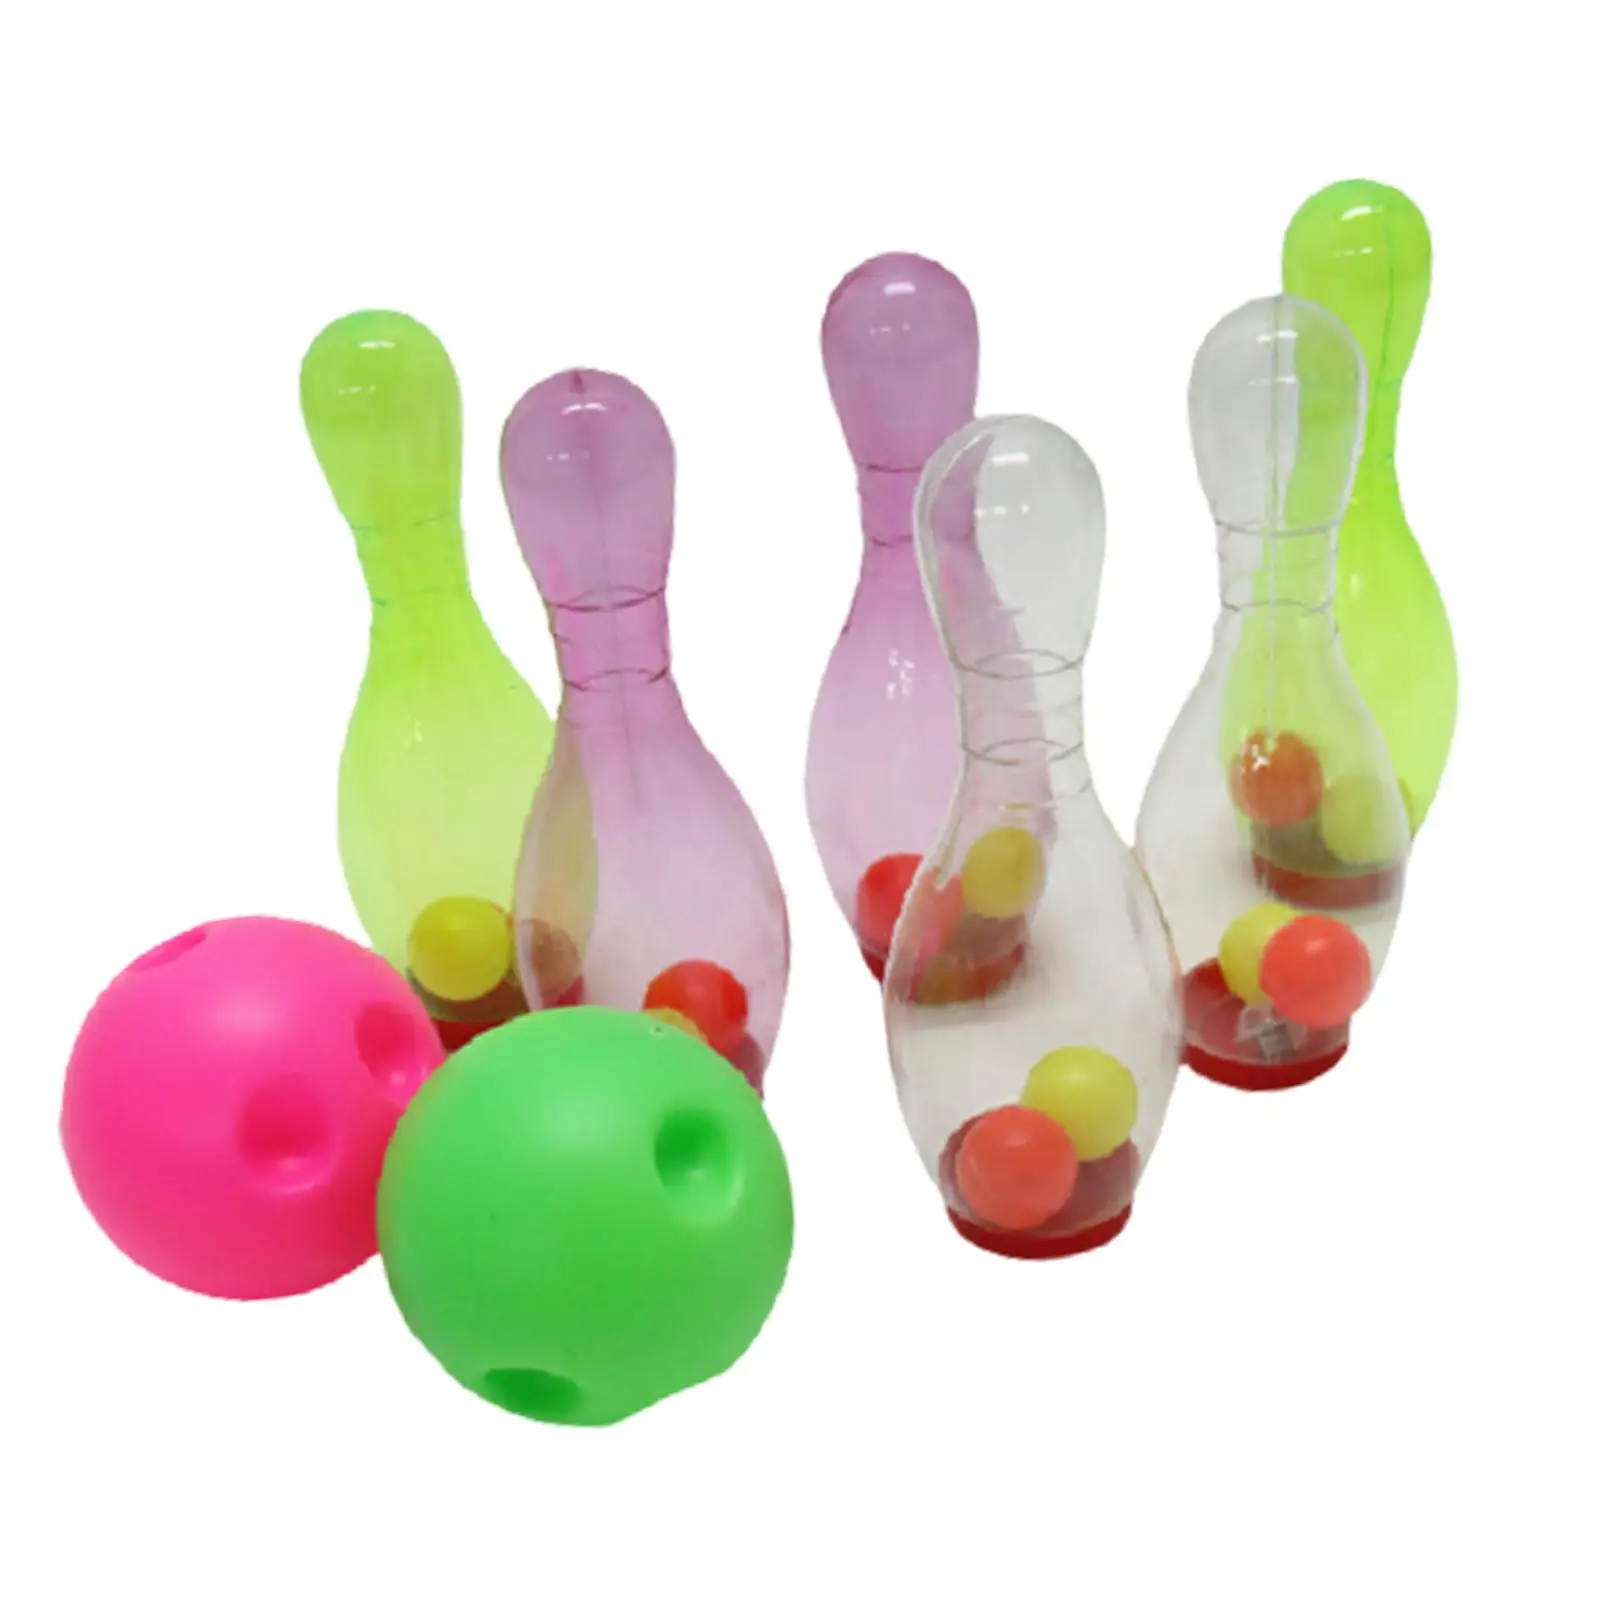 LED Bowling Set Light up Hand Eye Coordination Kids Sports Entertainment LED Bowling Pins for Kids Indoor Outdoor Games Child